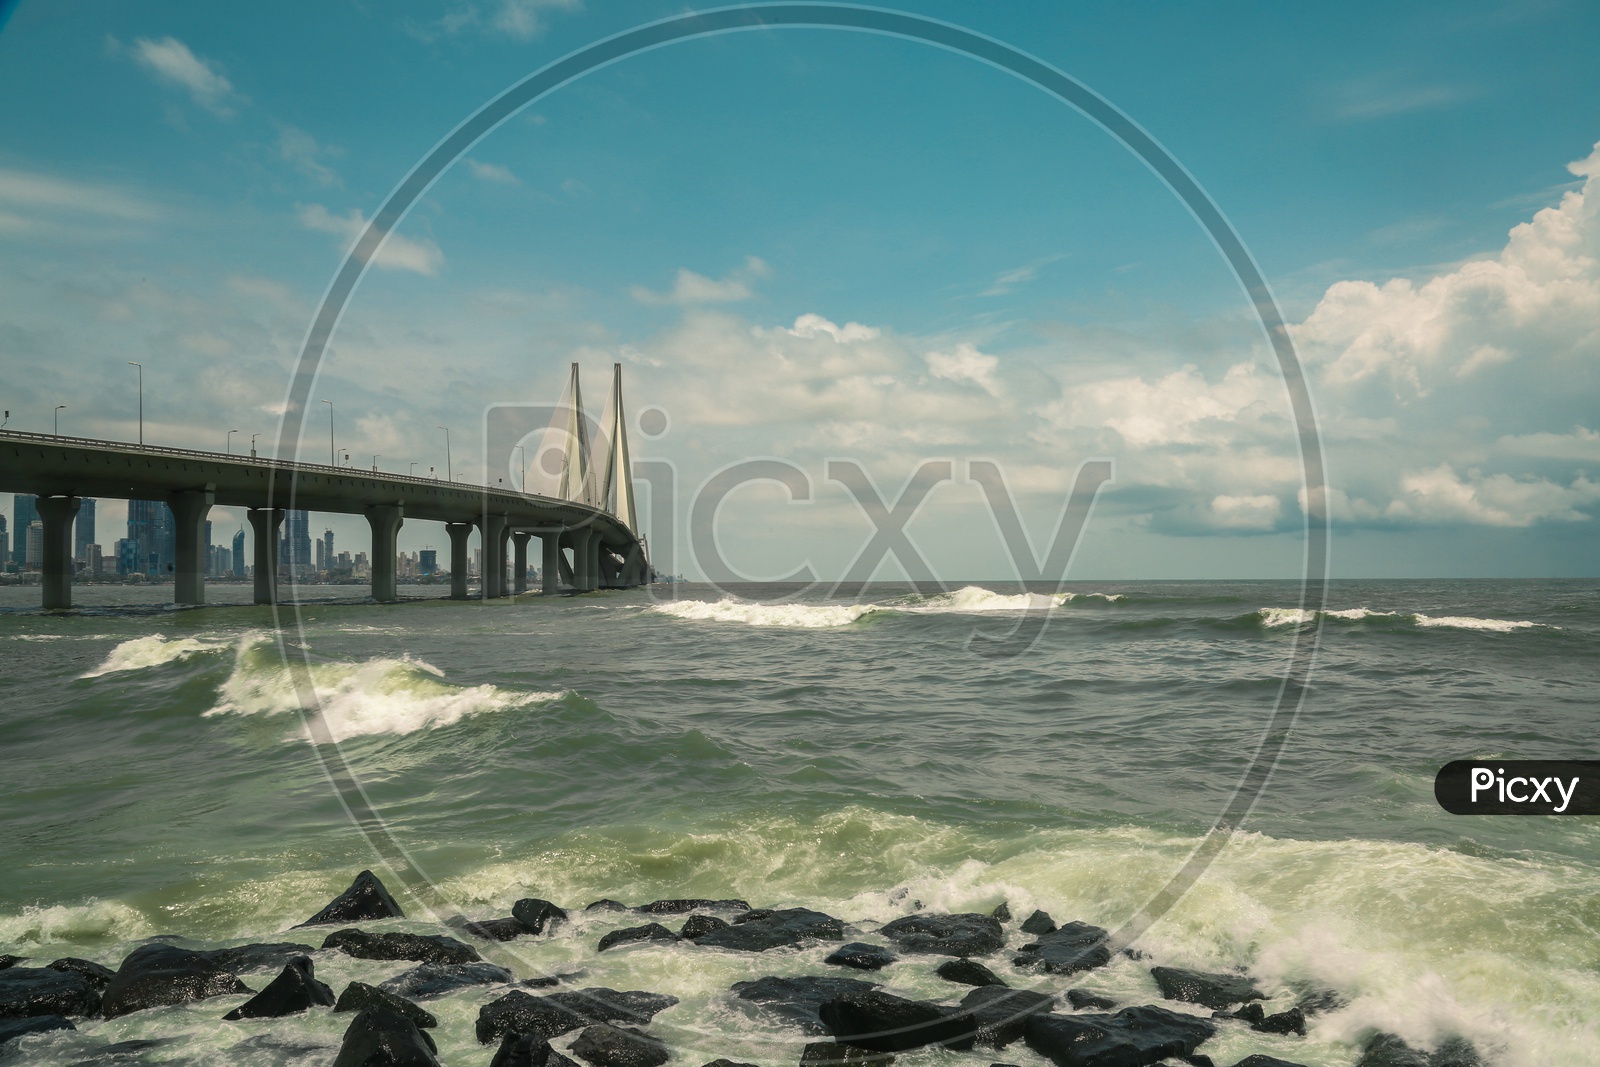 Bandra Worli Sea Link Or Cable Suspended Bridge With Pre Stressed Concrete - Steel Viaducts  Over Arabian Sea in Munbai  Connection Bandra And Worli